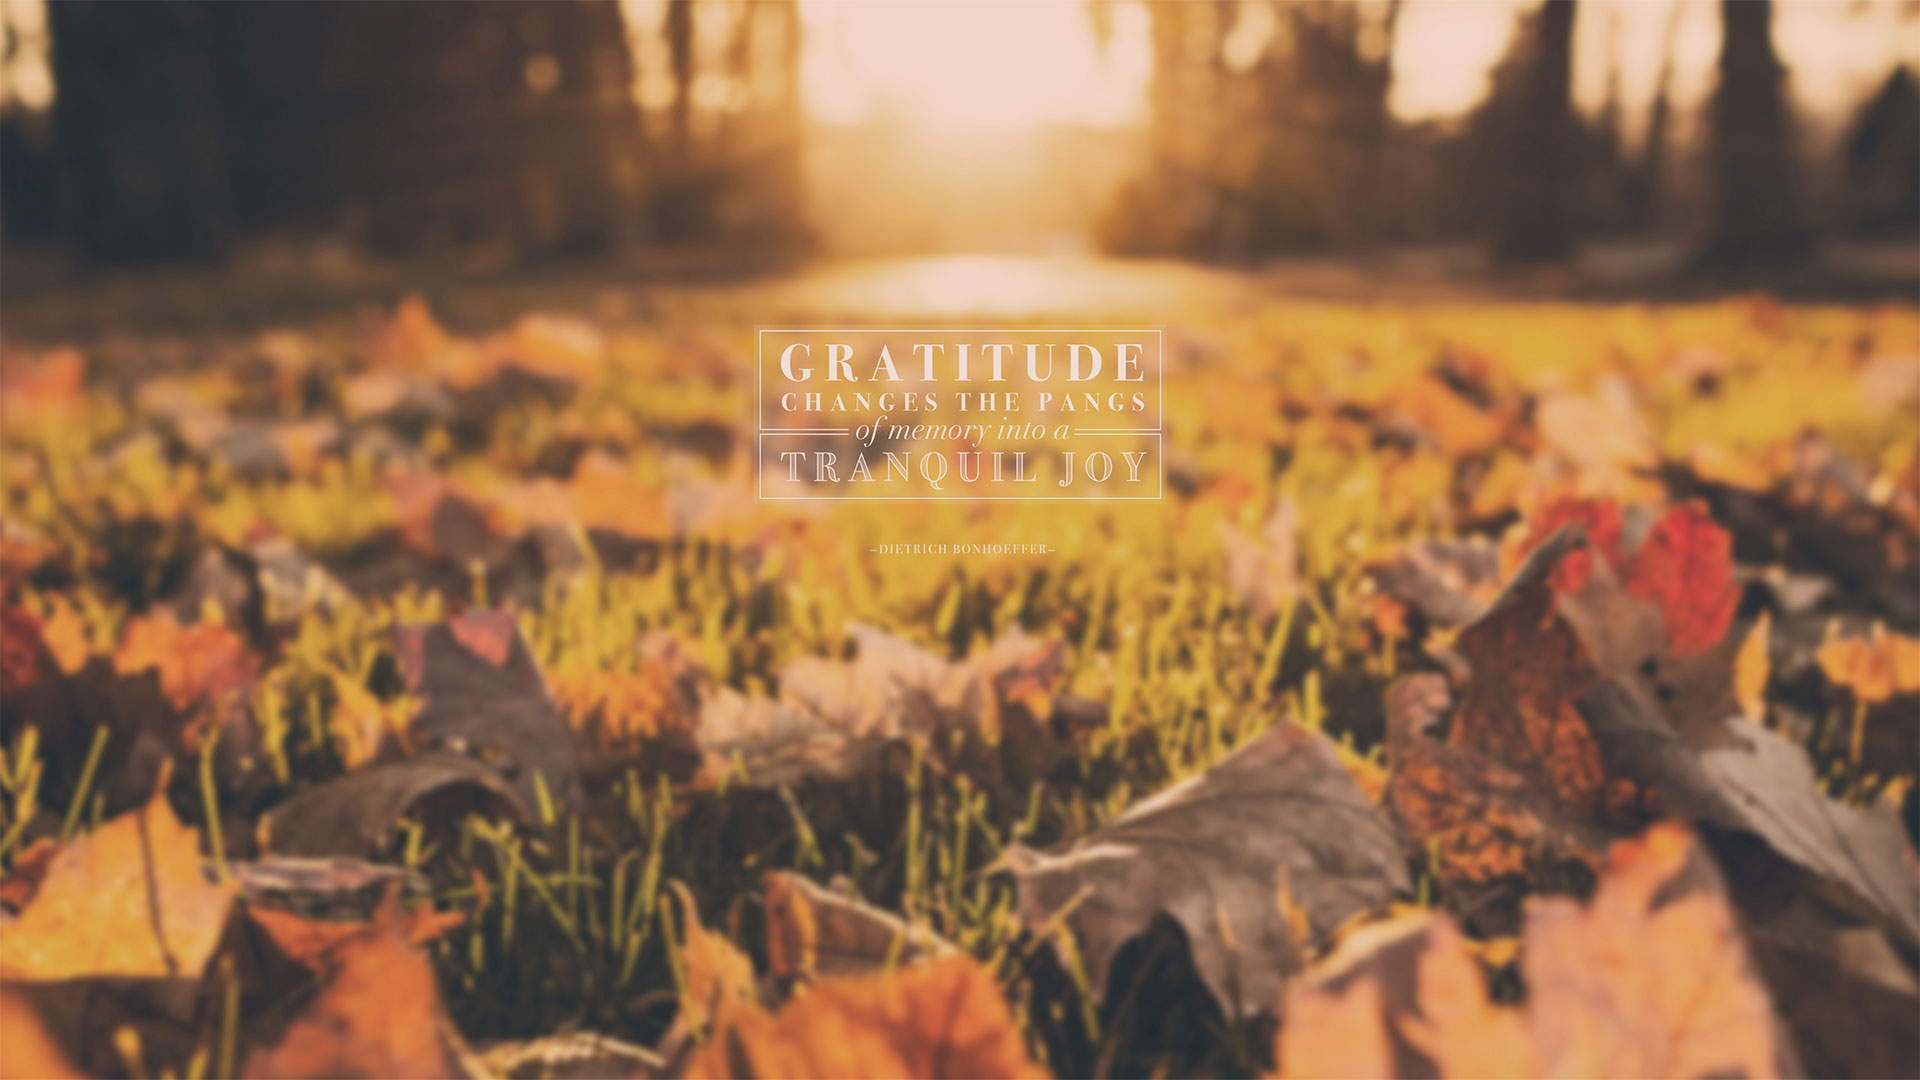 Wednesday Wallpaper: Gratitude Changes the Pangs of Memory - Jacob Abshire